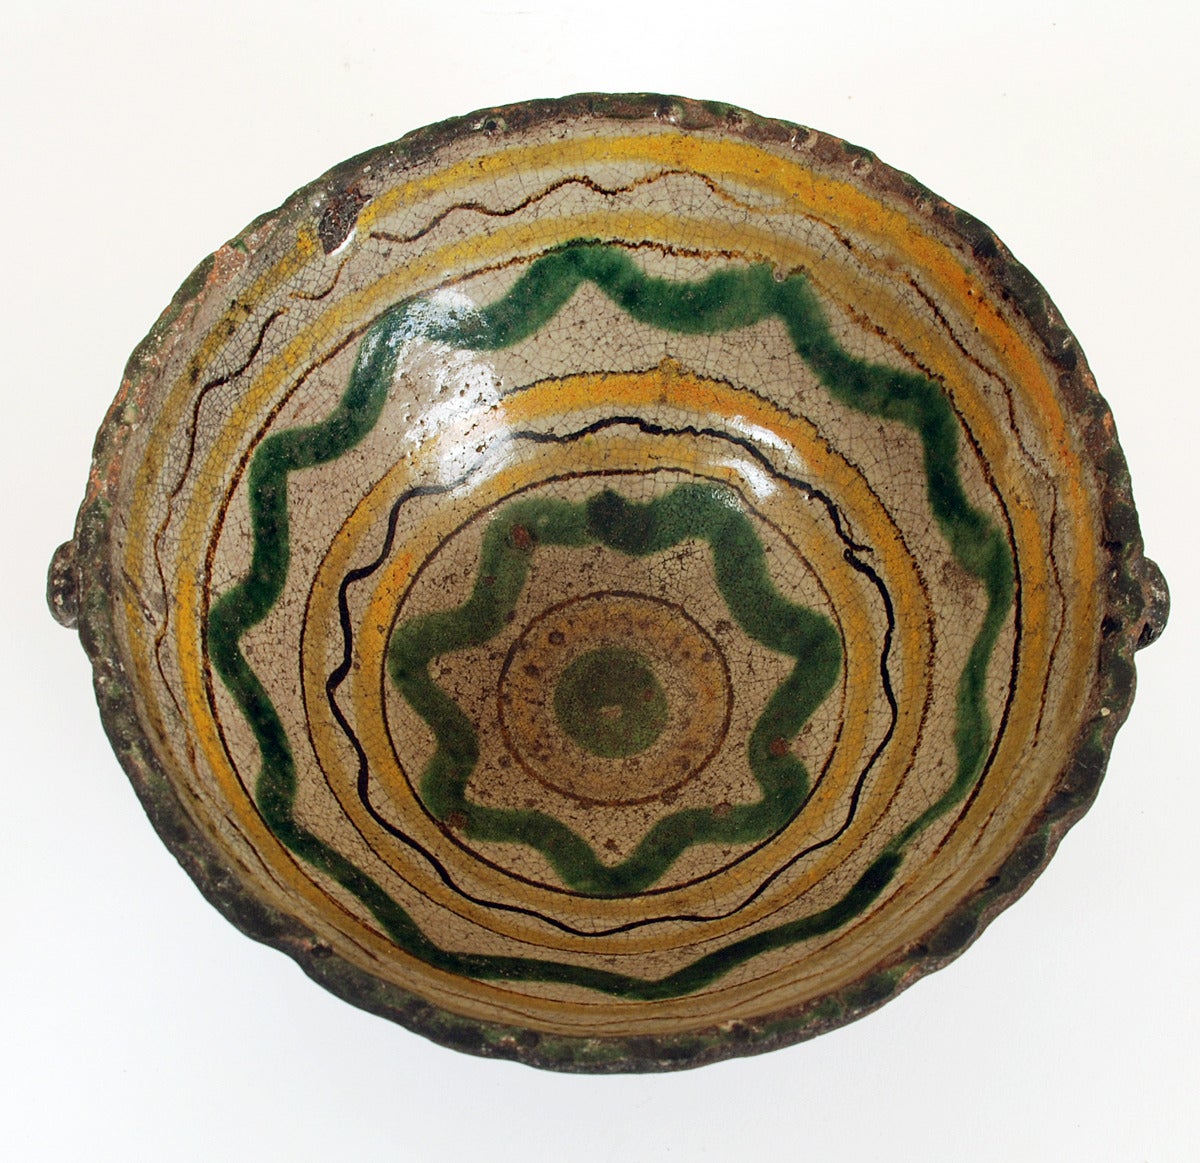 A colorful late 19th century majolica bowl, made by the Montiel Family Studio in Antigua, Guatemala - circa 1890 - 1900. Overall with excellent wear and surface patina.

Dimensions: 9.5 inches diameter x 4 inches high.

In excellent, original